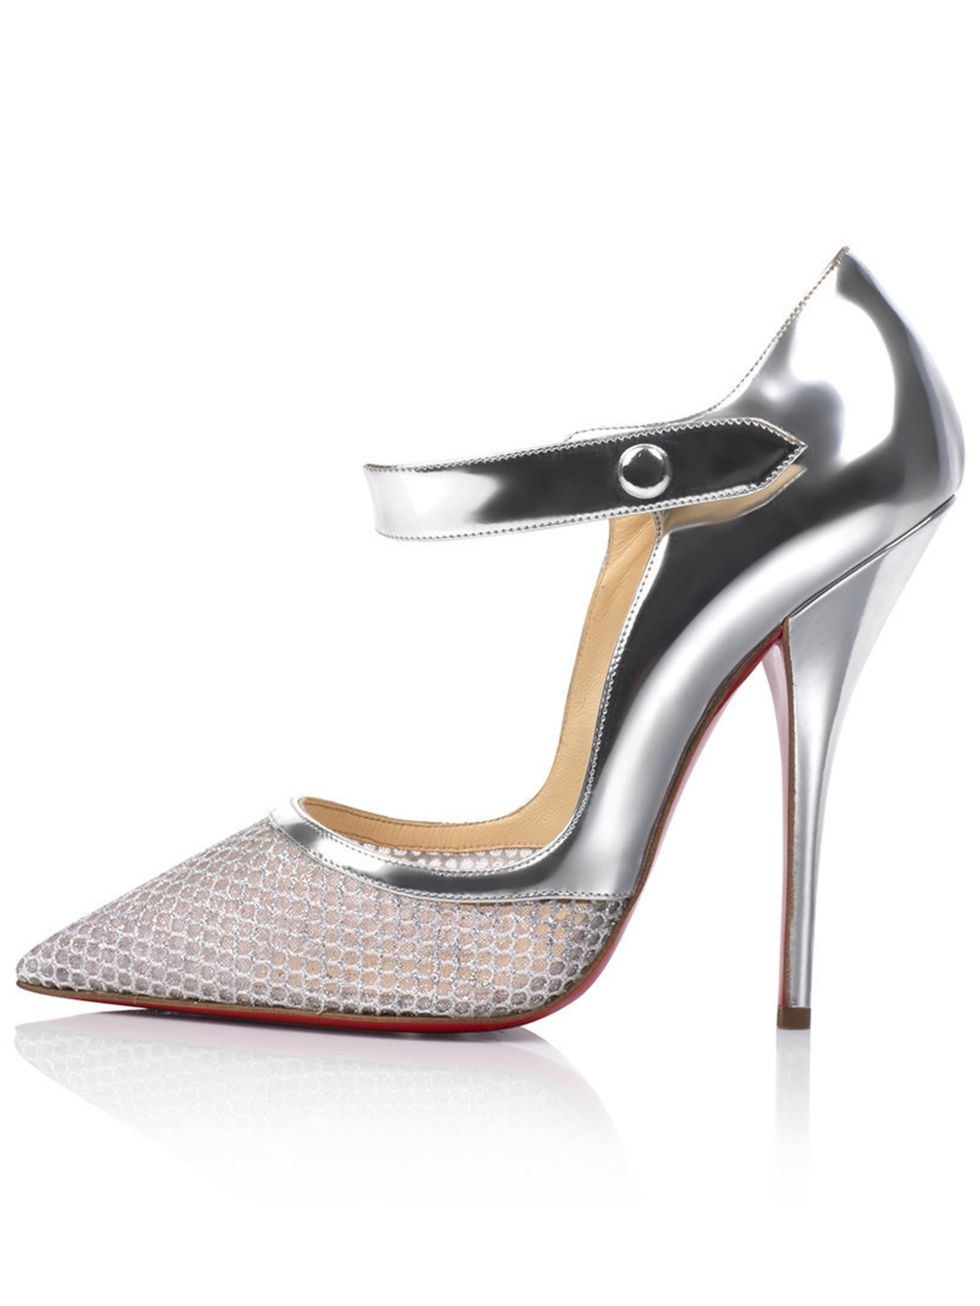 &lt;p&gt;Christian Louboutin for Silver Linings&lt;/p&gt;